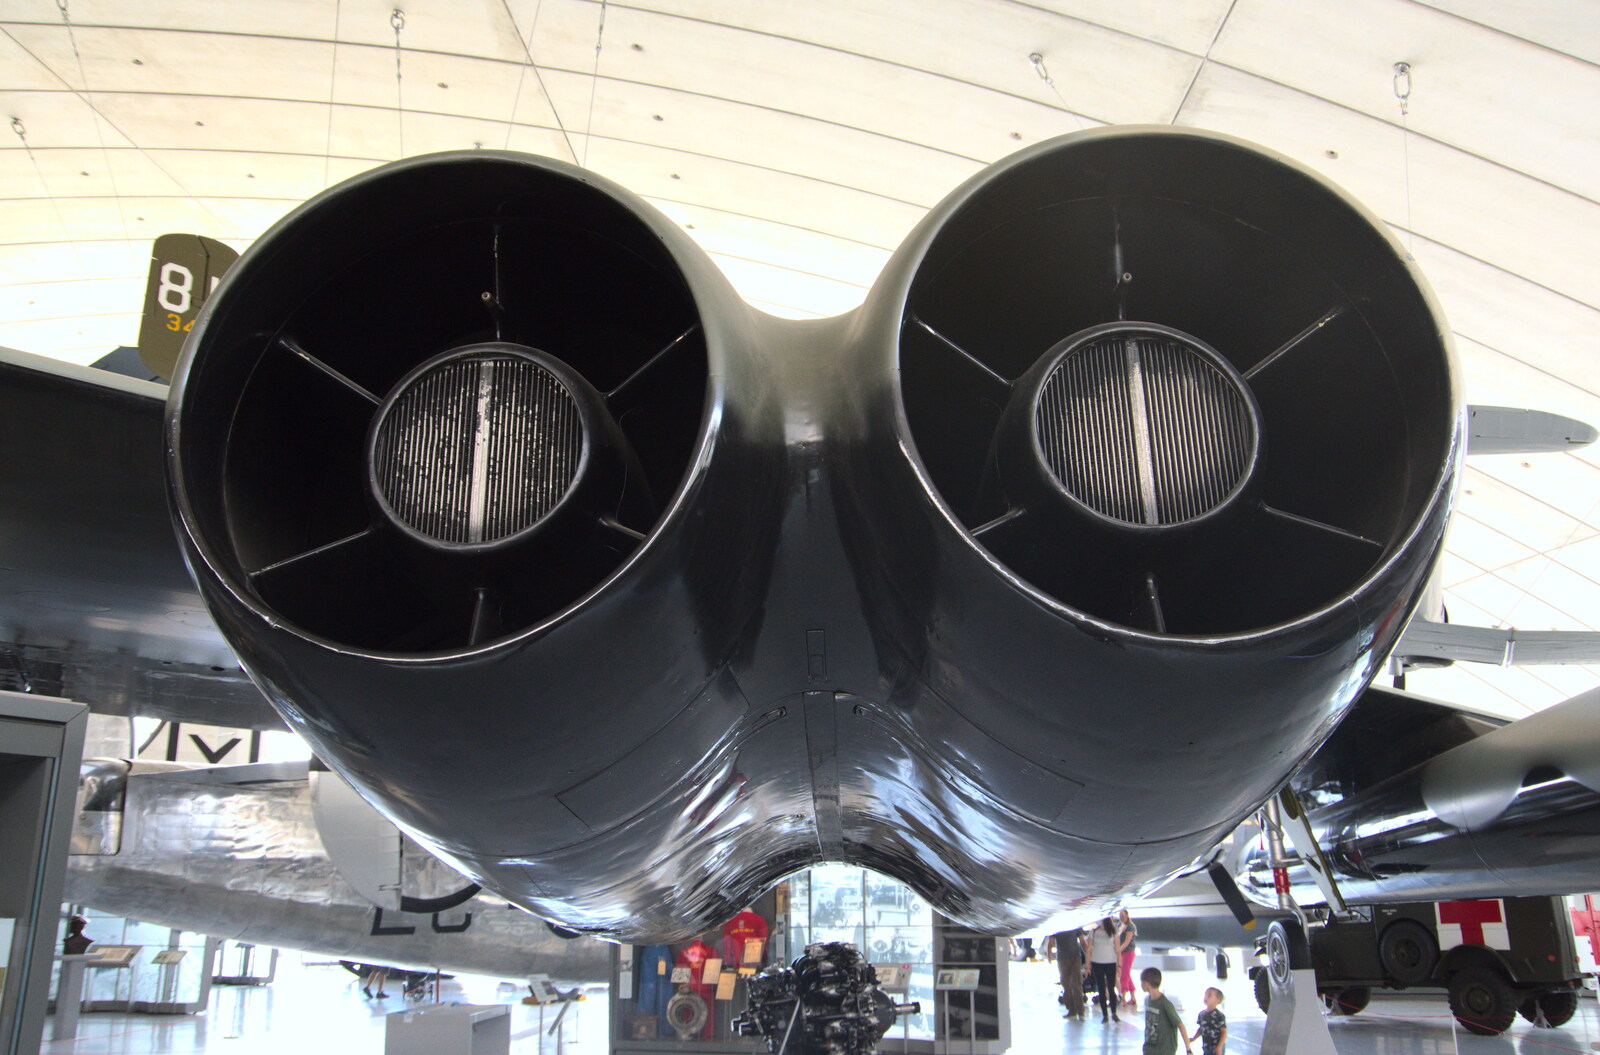 Two the the B-52's eight engines from The Duxford Dash, IWM Duxford, Cambridge - 13th September 2020